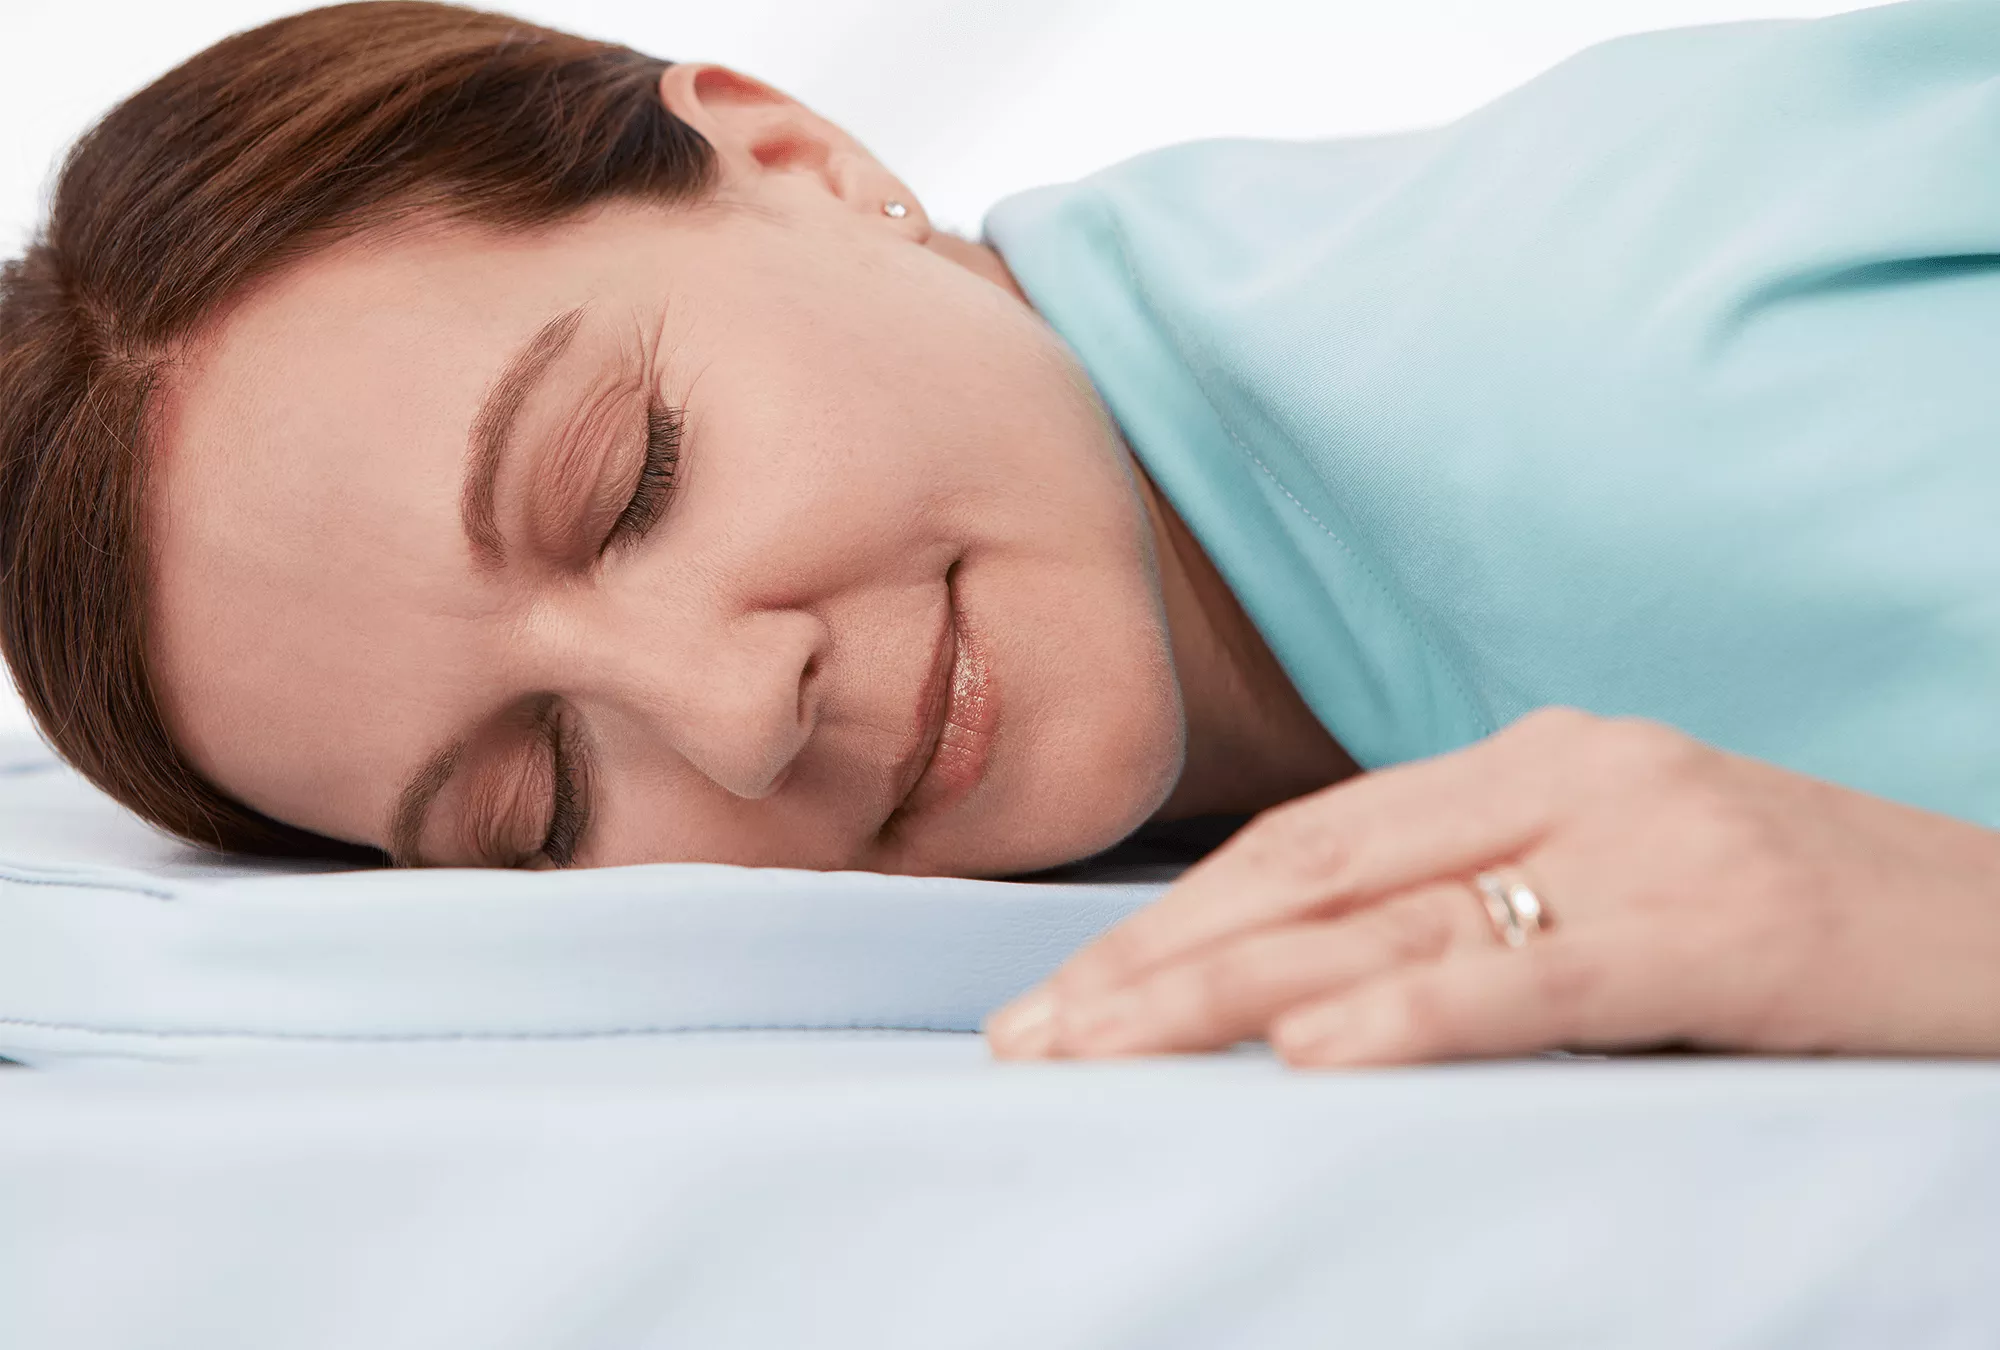 Woman patient lying down on bed comfortably with compassionate experience